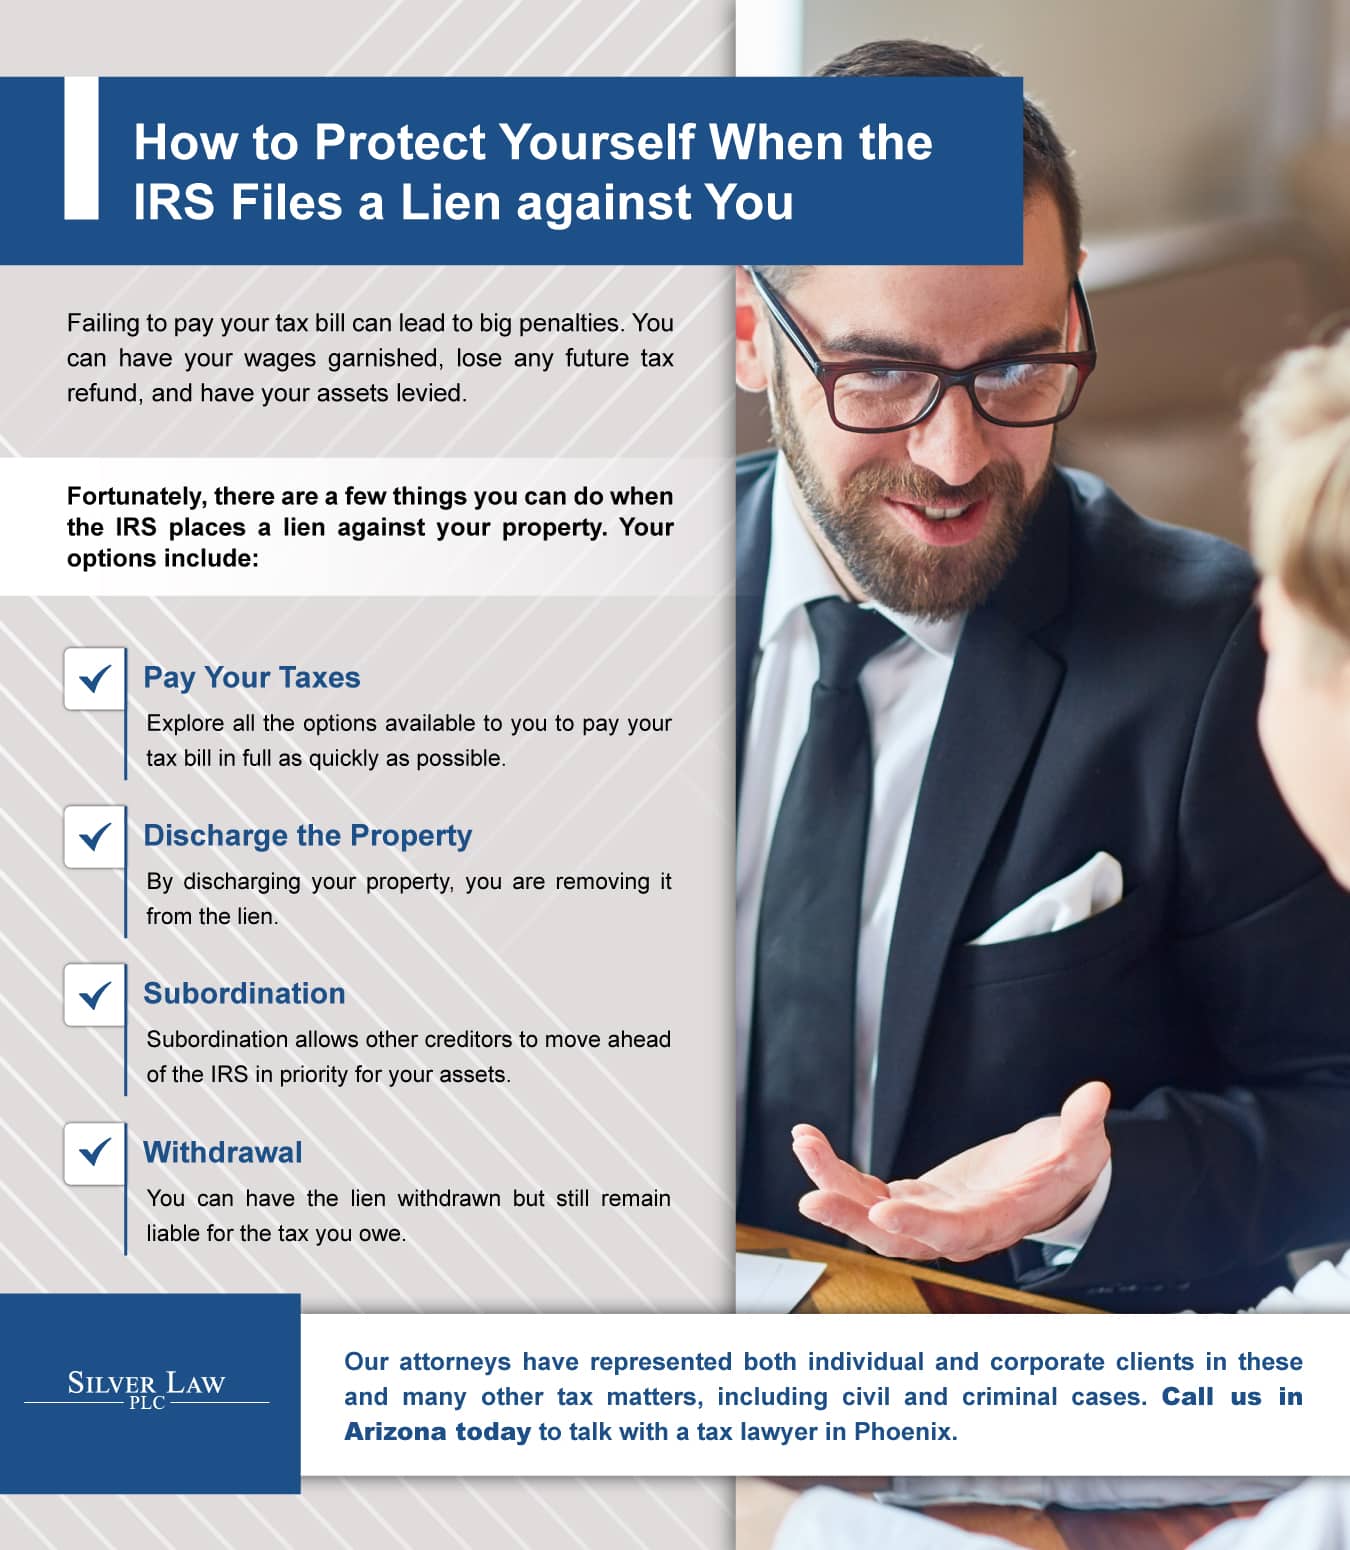 An infographic that shows how to protect yourself when the IRS files a lien against you